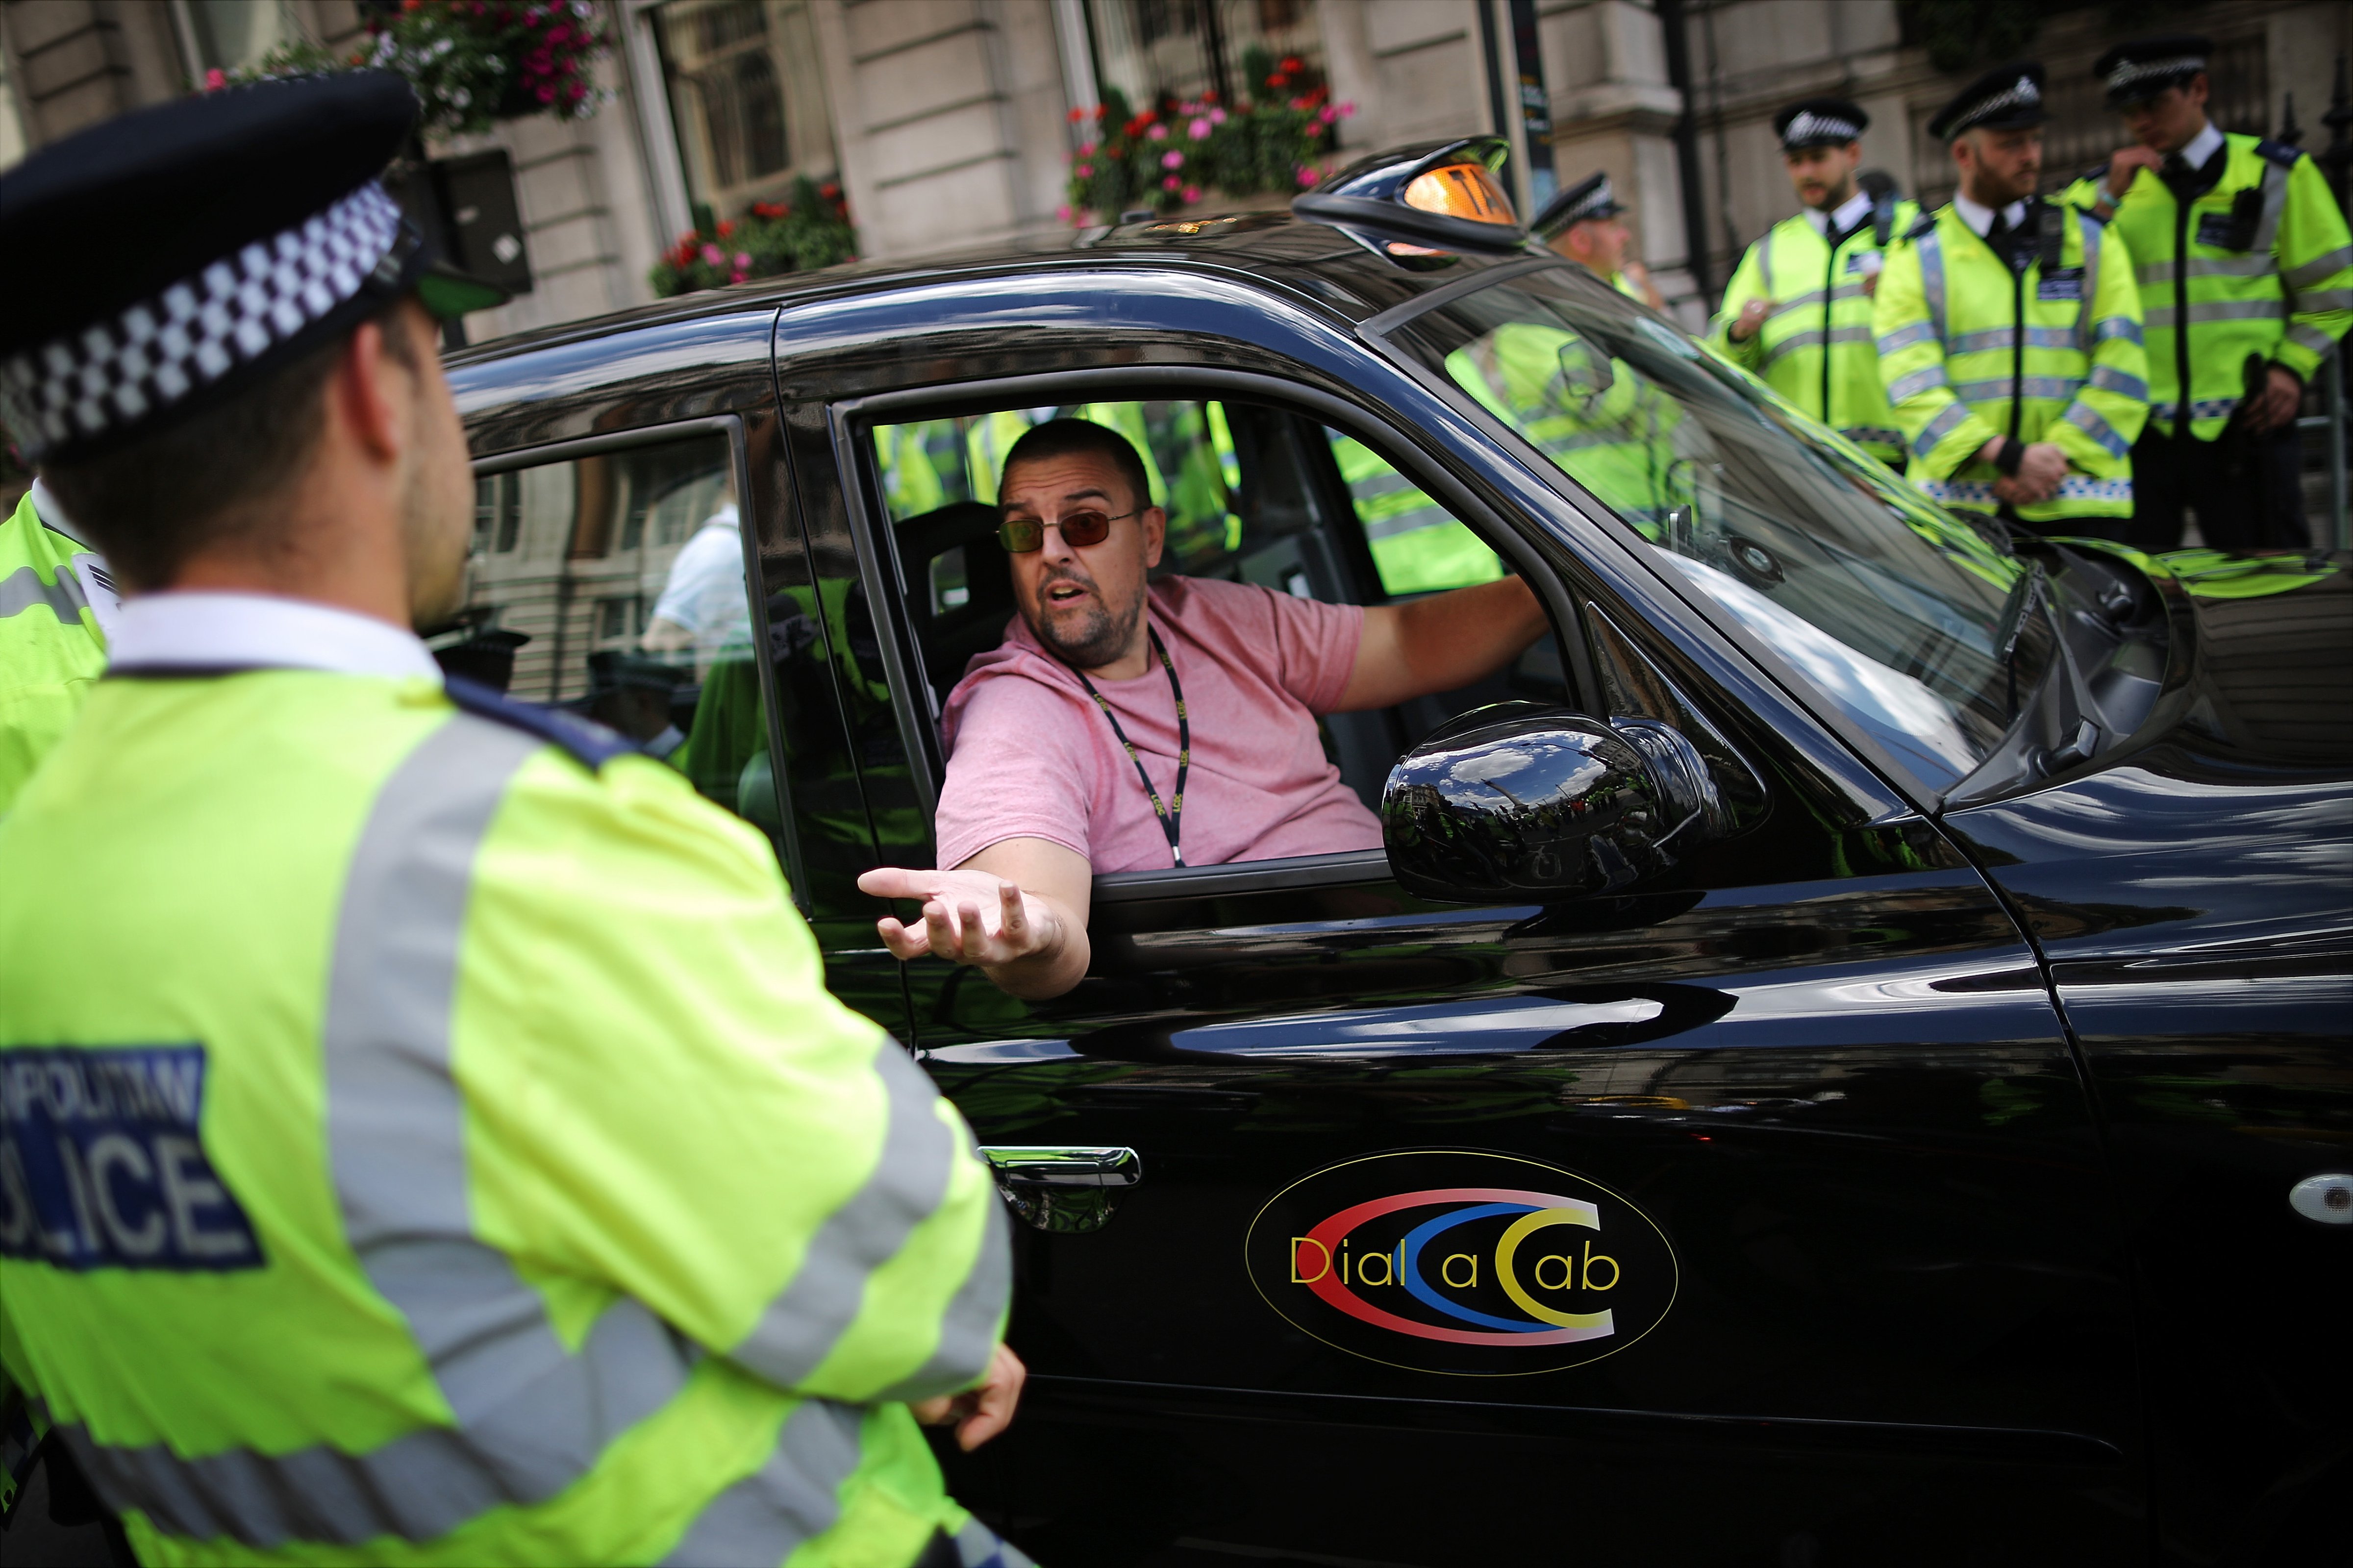 A London taxi driver speaks with Police Officers during a protest against a new smart phone app, 'Uber' on June 11, 2014 in London, England. (Dan Kitwood—Getty Images)